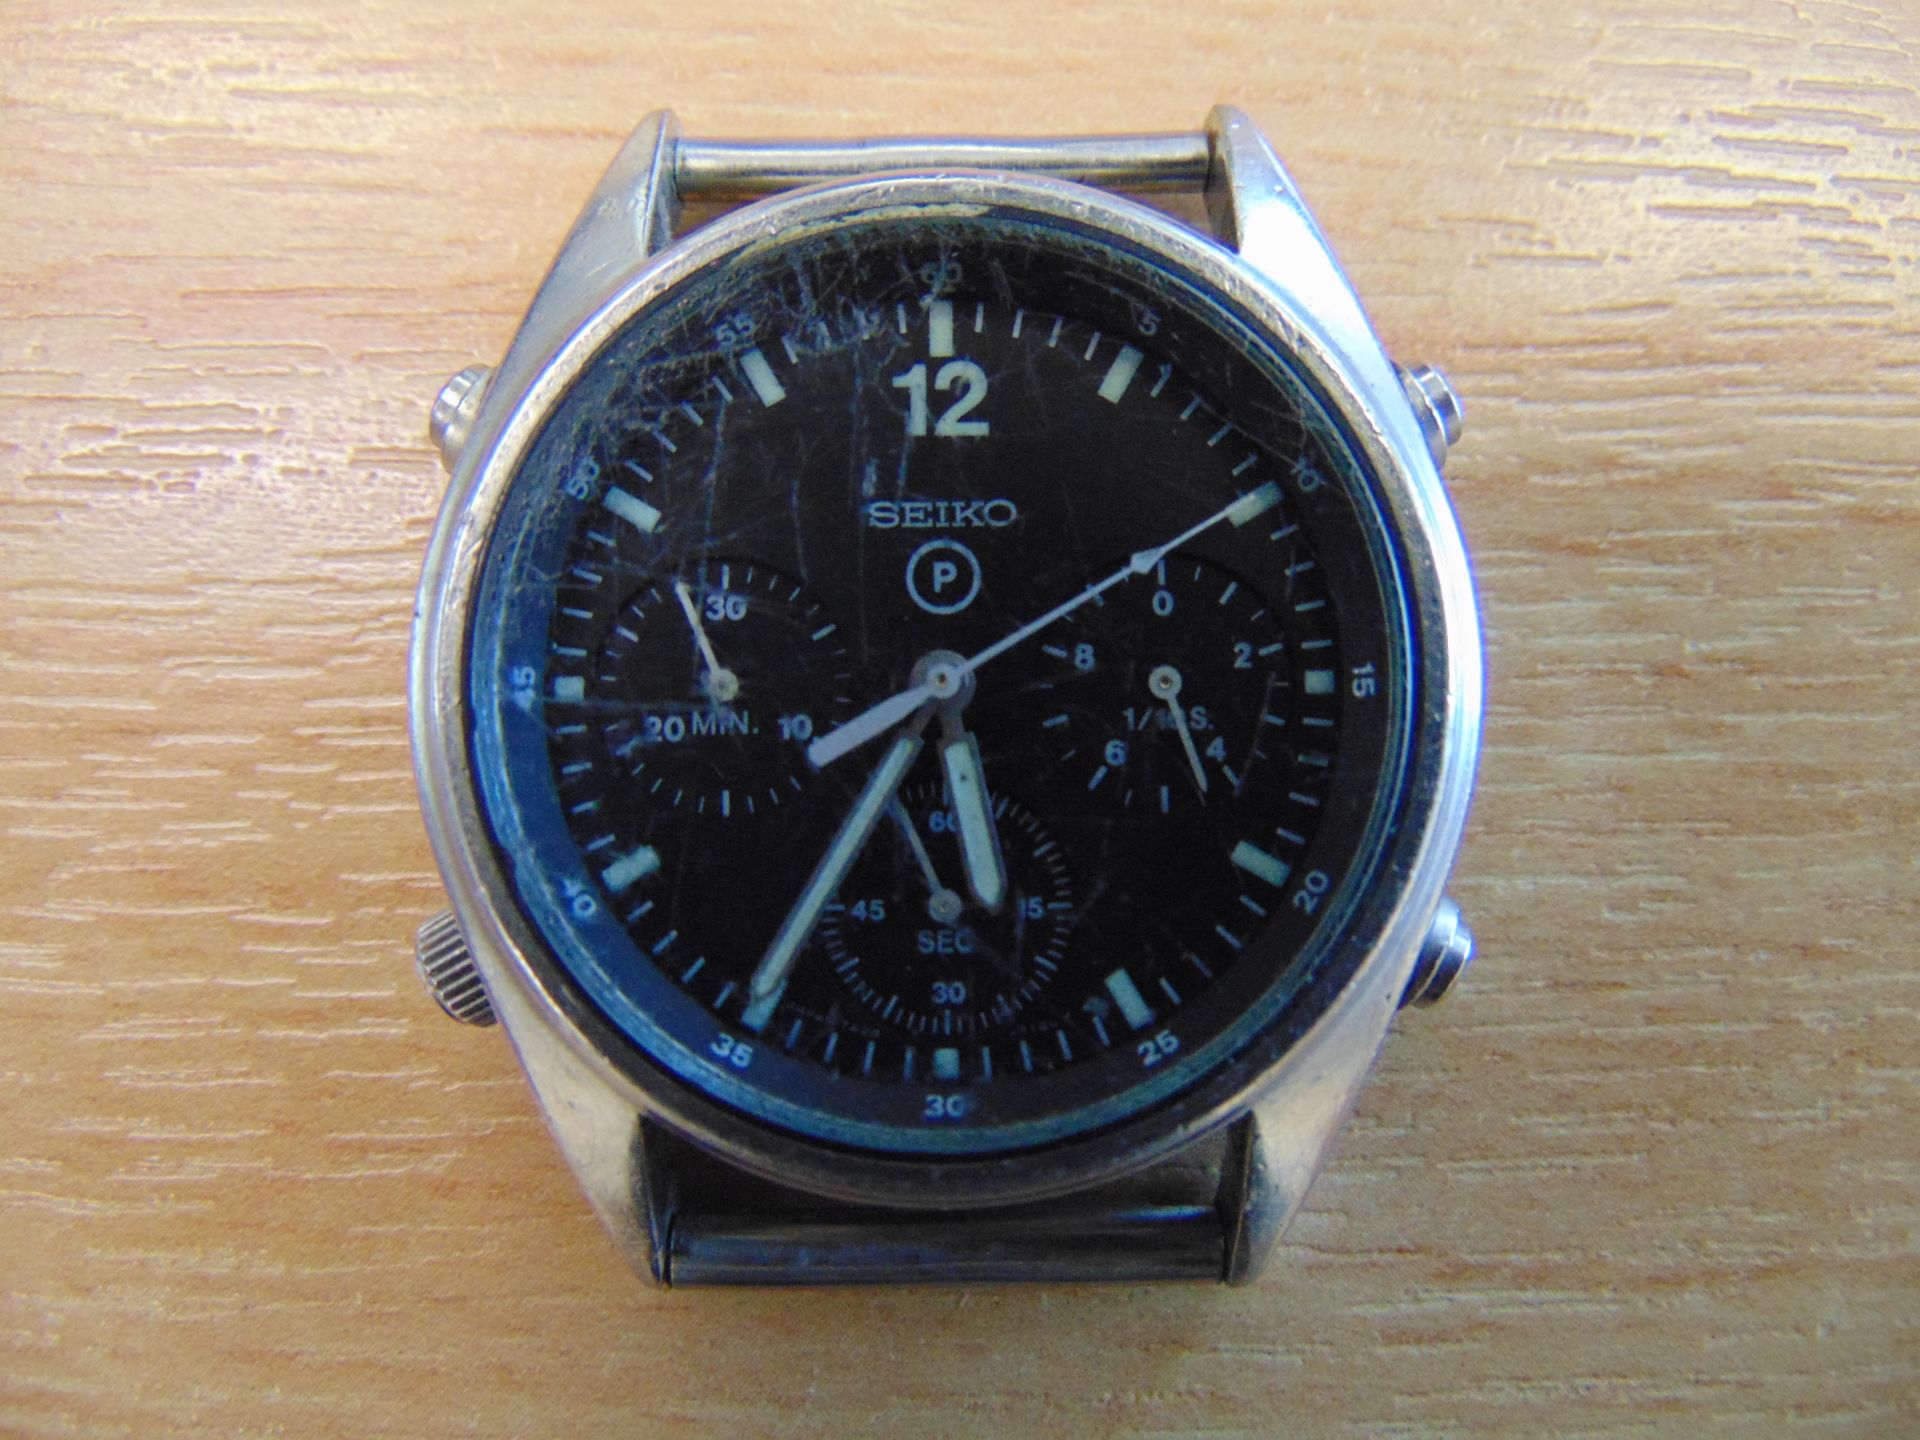 SEIKO Gen 1 Pilots Chrono RAF Harrier Force Issue Nato Marks, Date 1984 - Image 3 of 6